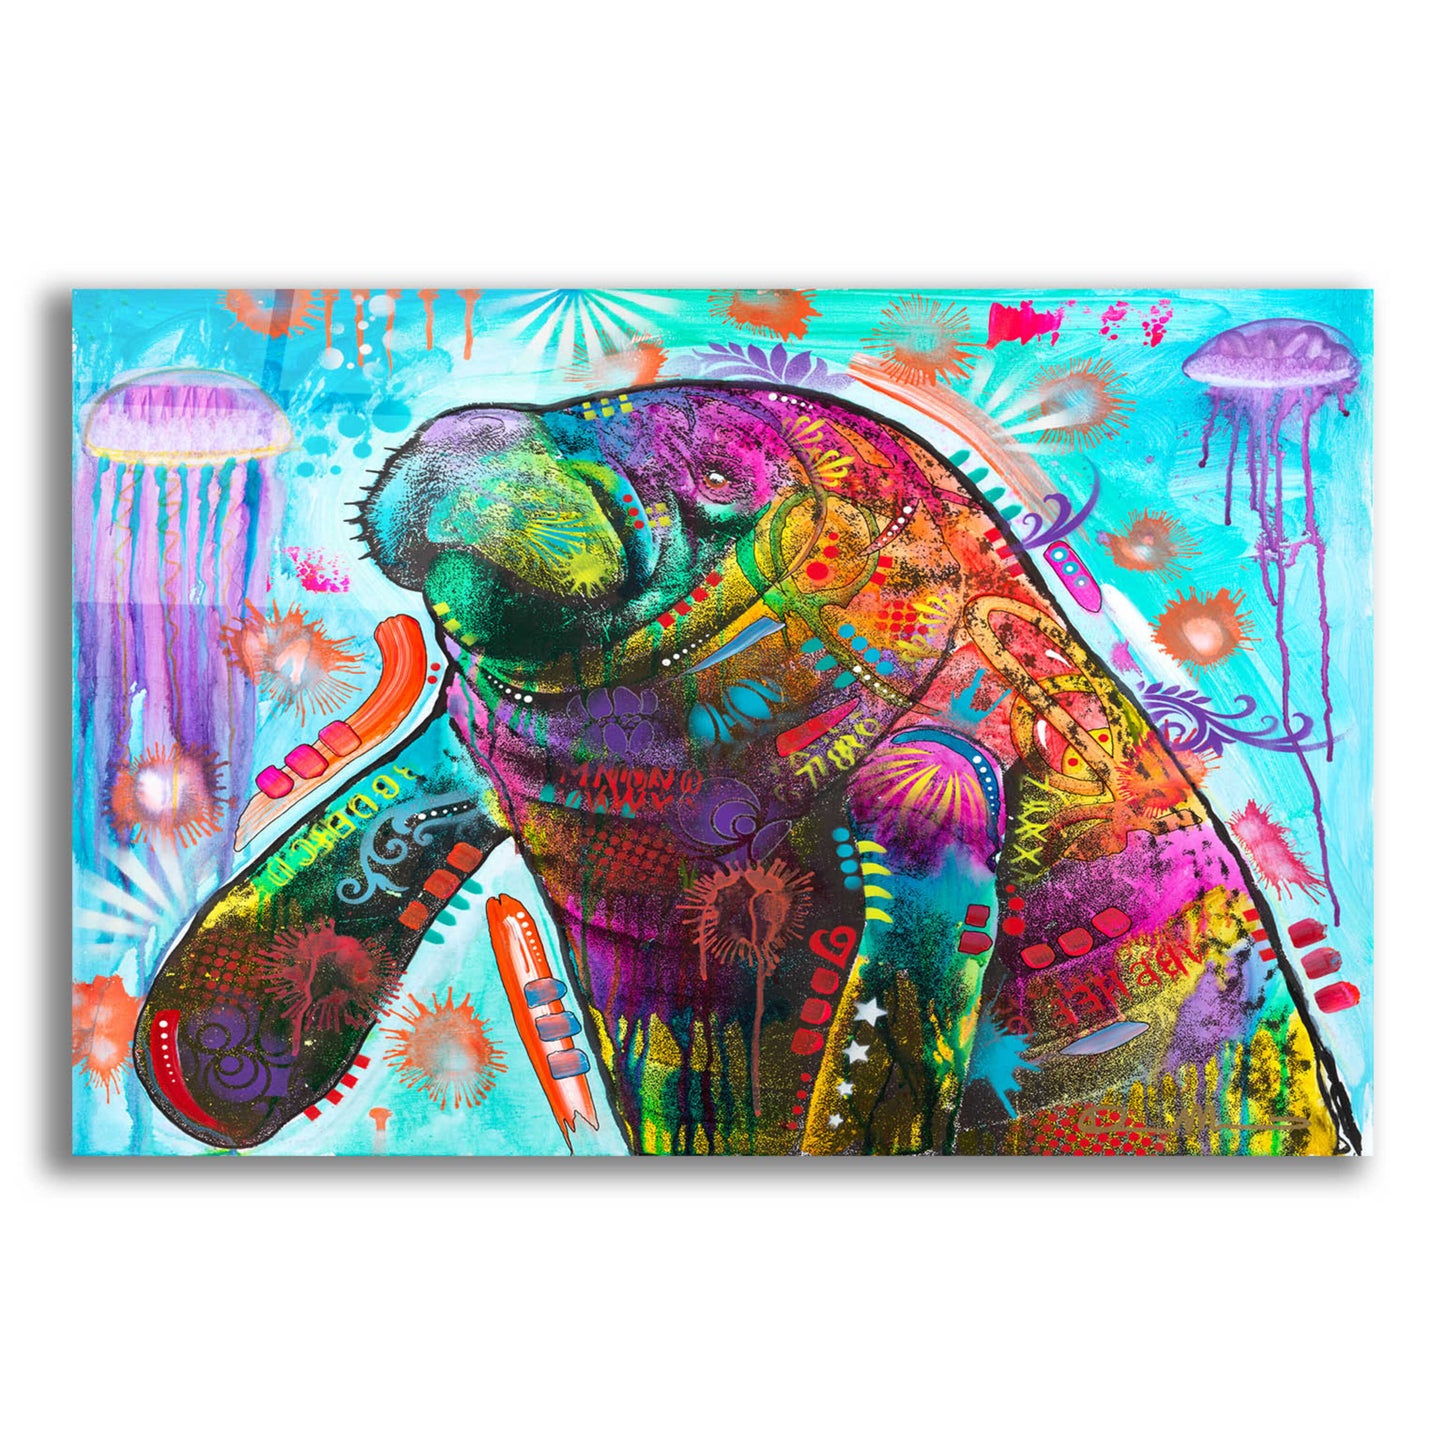 Epic Art 'Manatee' by Dean Russo, Acrylic Glass Wall Art